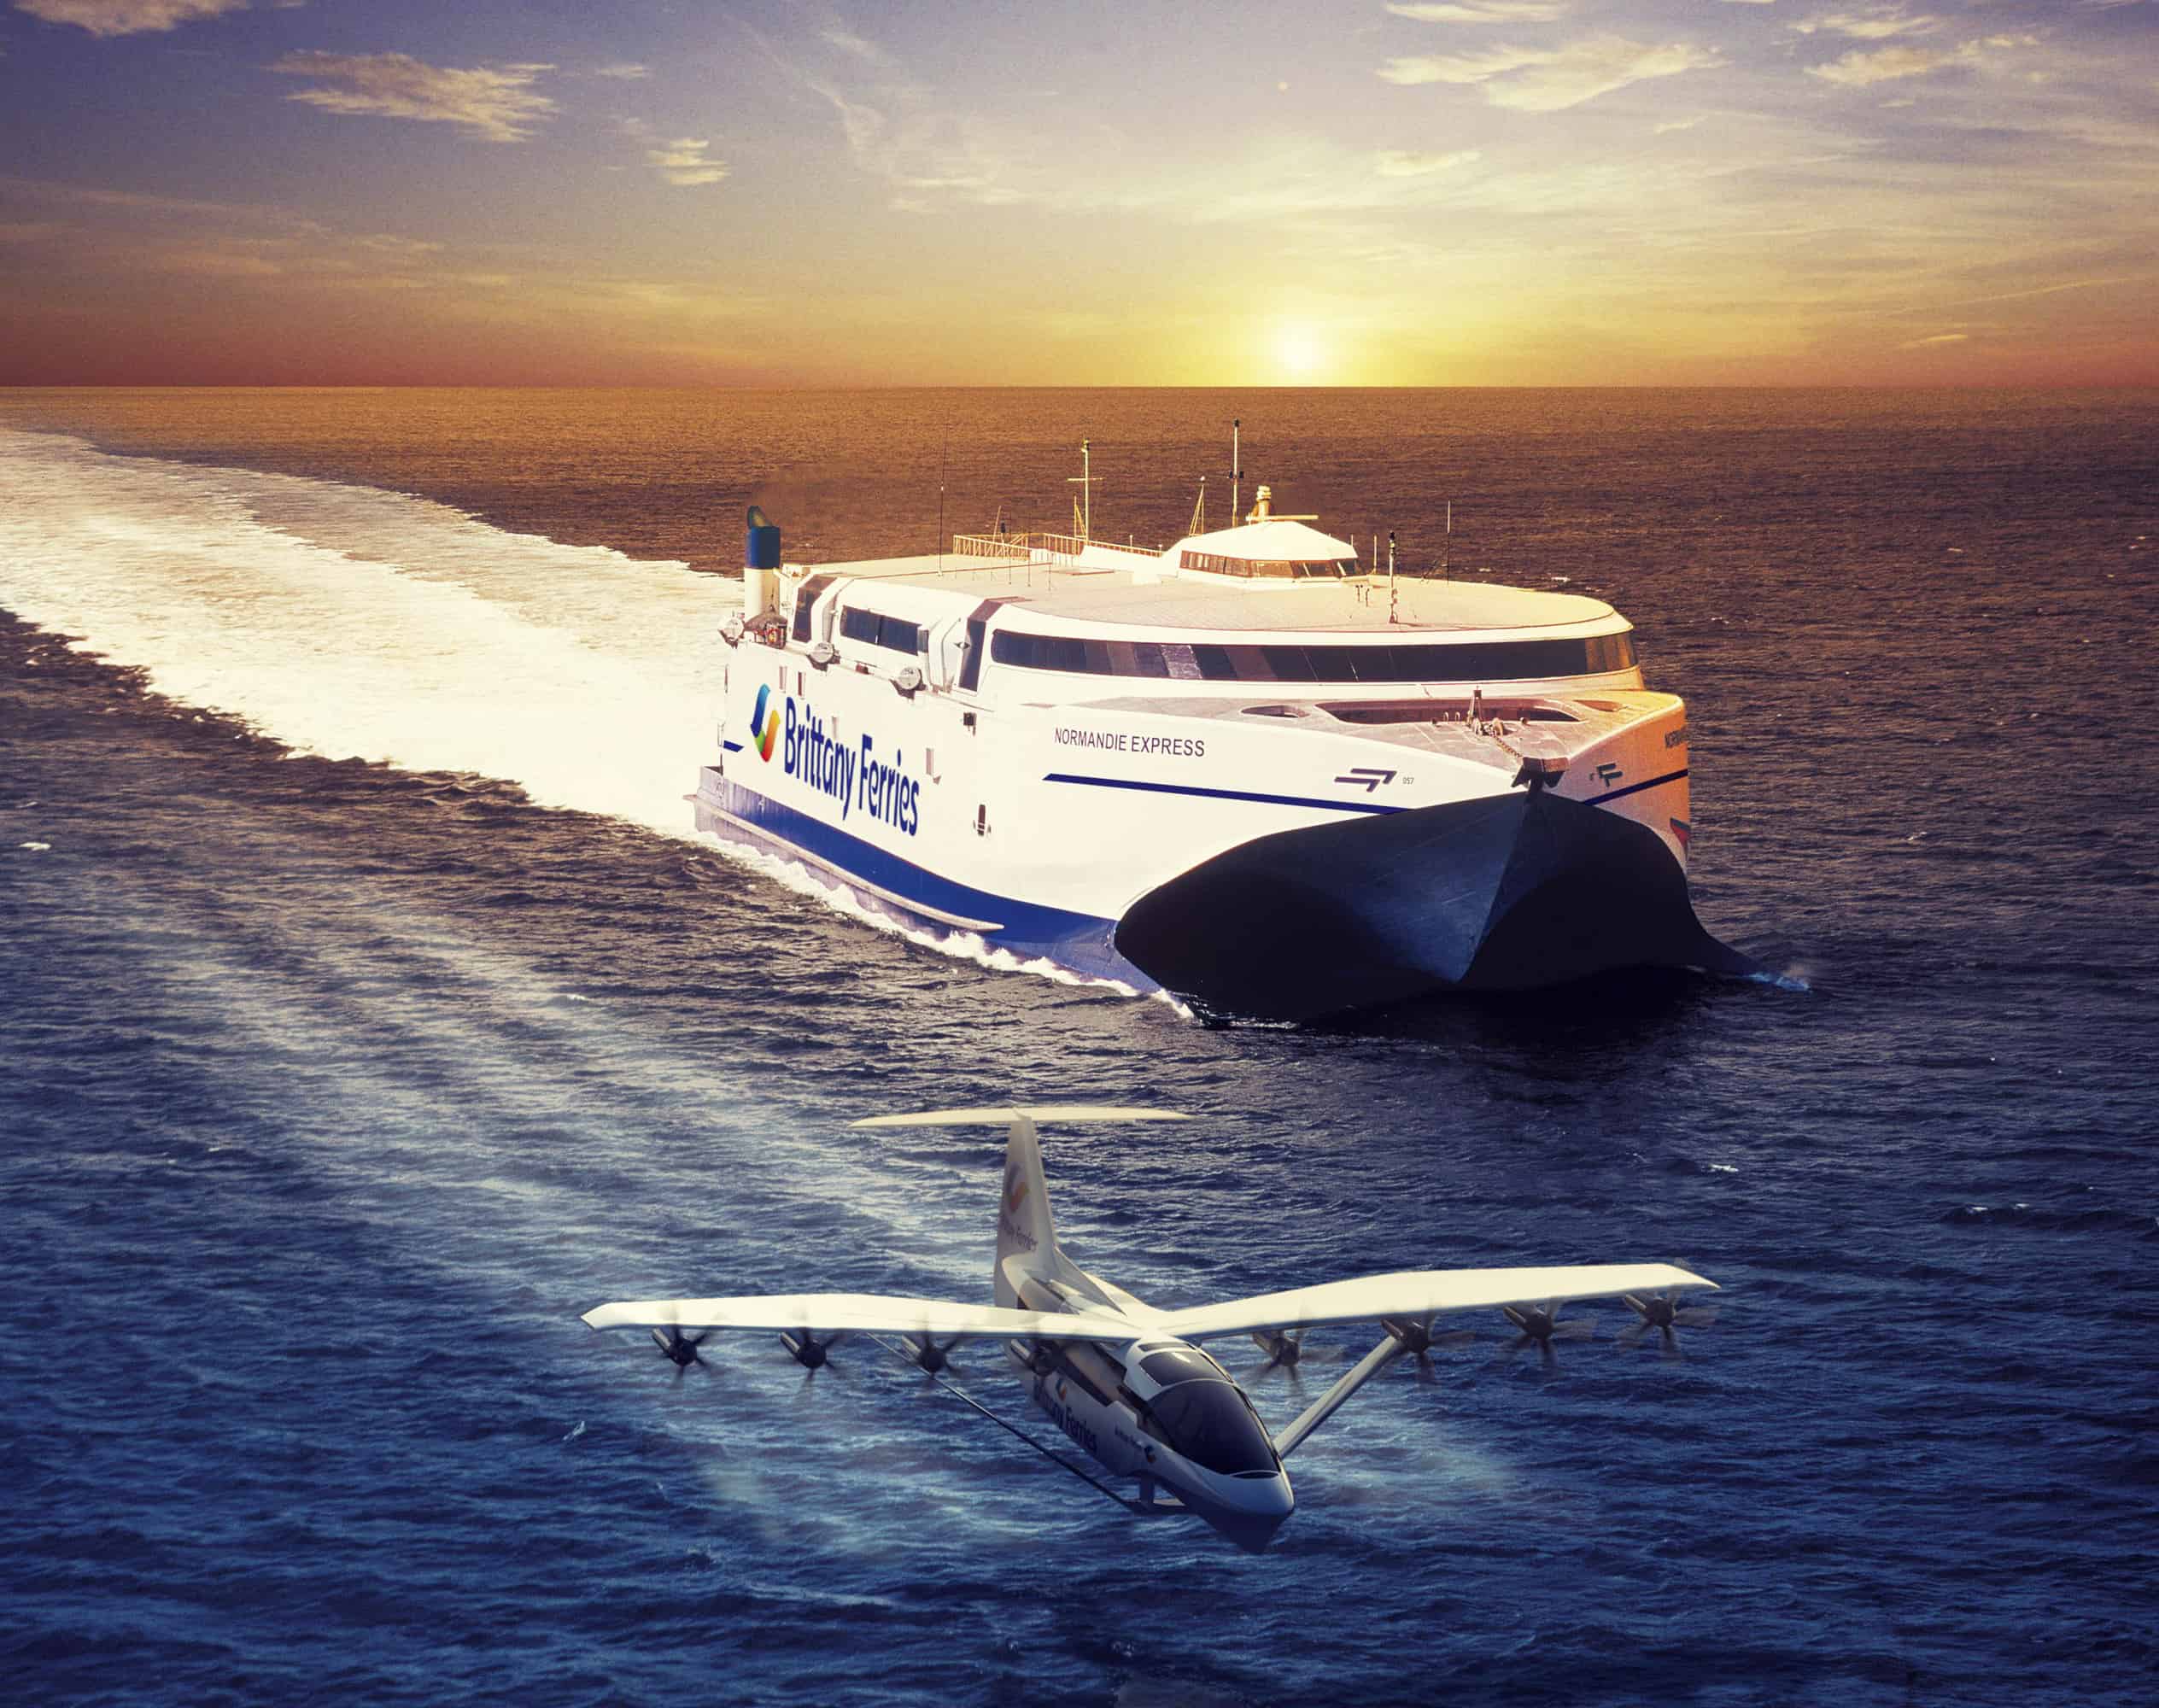 ‘Flying ferries’ could slash cross-Channel journey times to 40 minutes